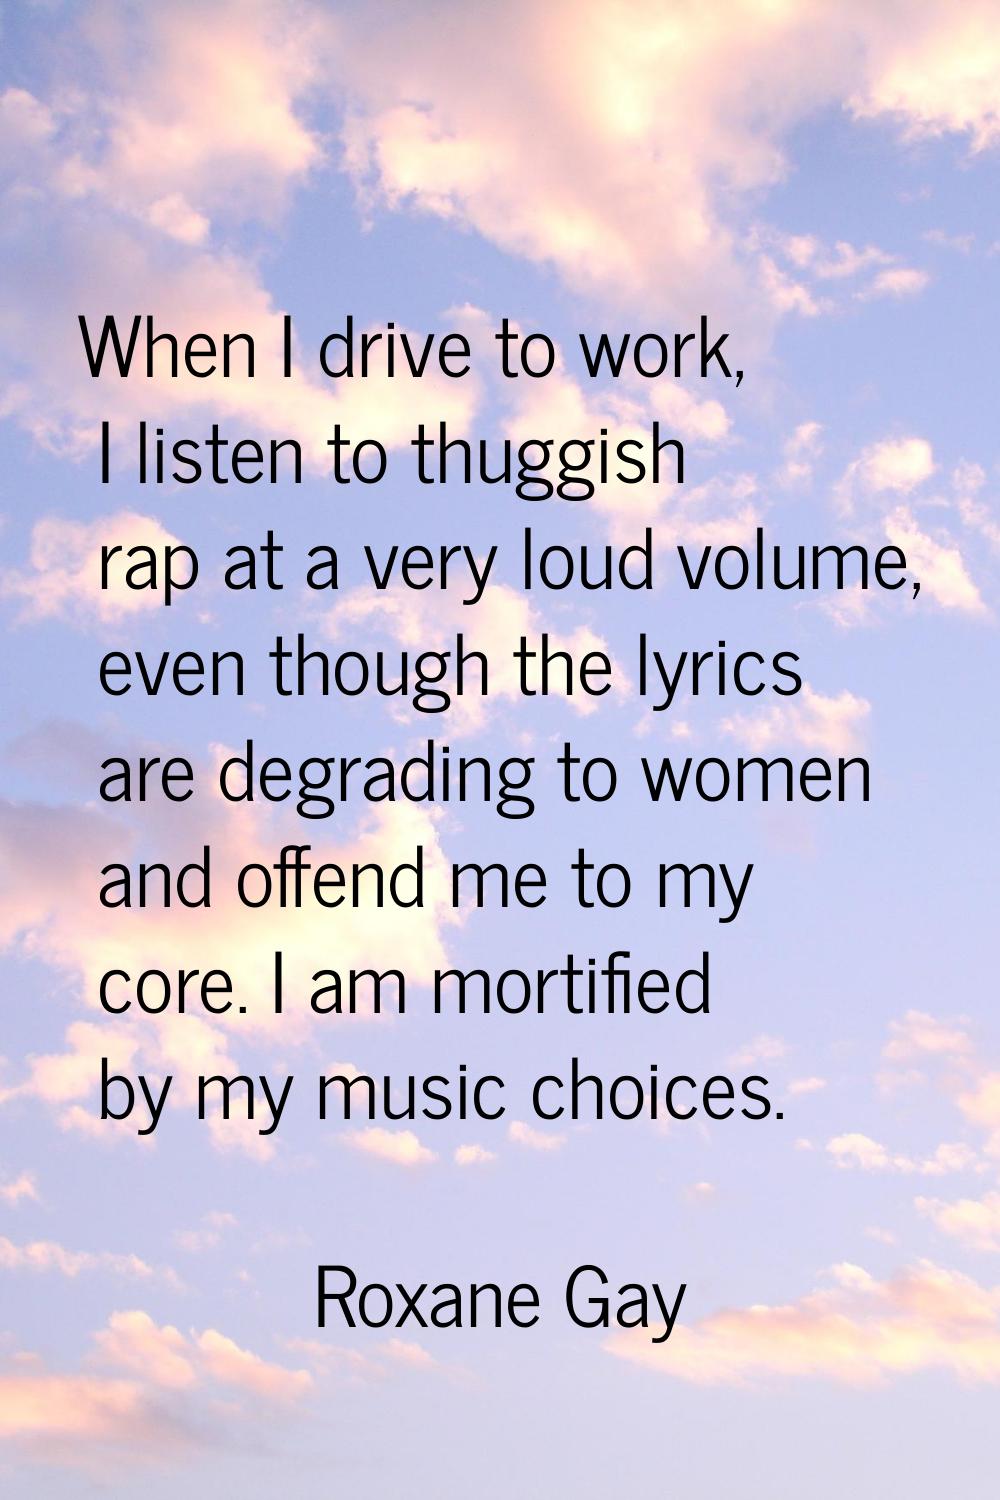 When I drive to work, I listen to thuggish rap at a very loud volume, even though the lyrics are de